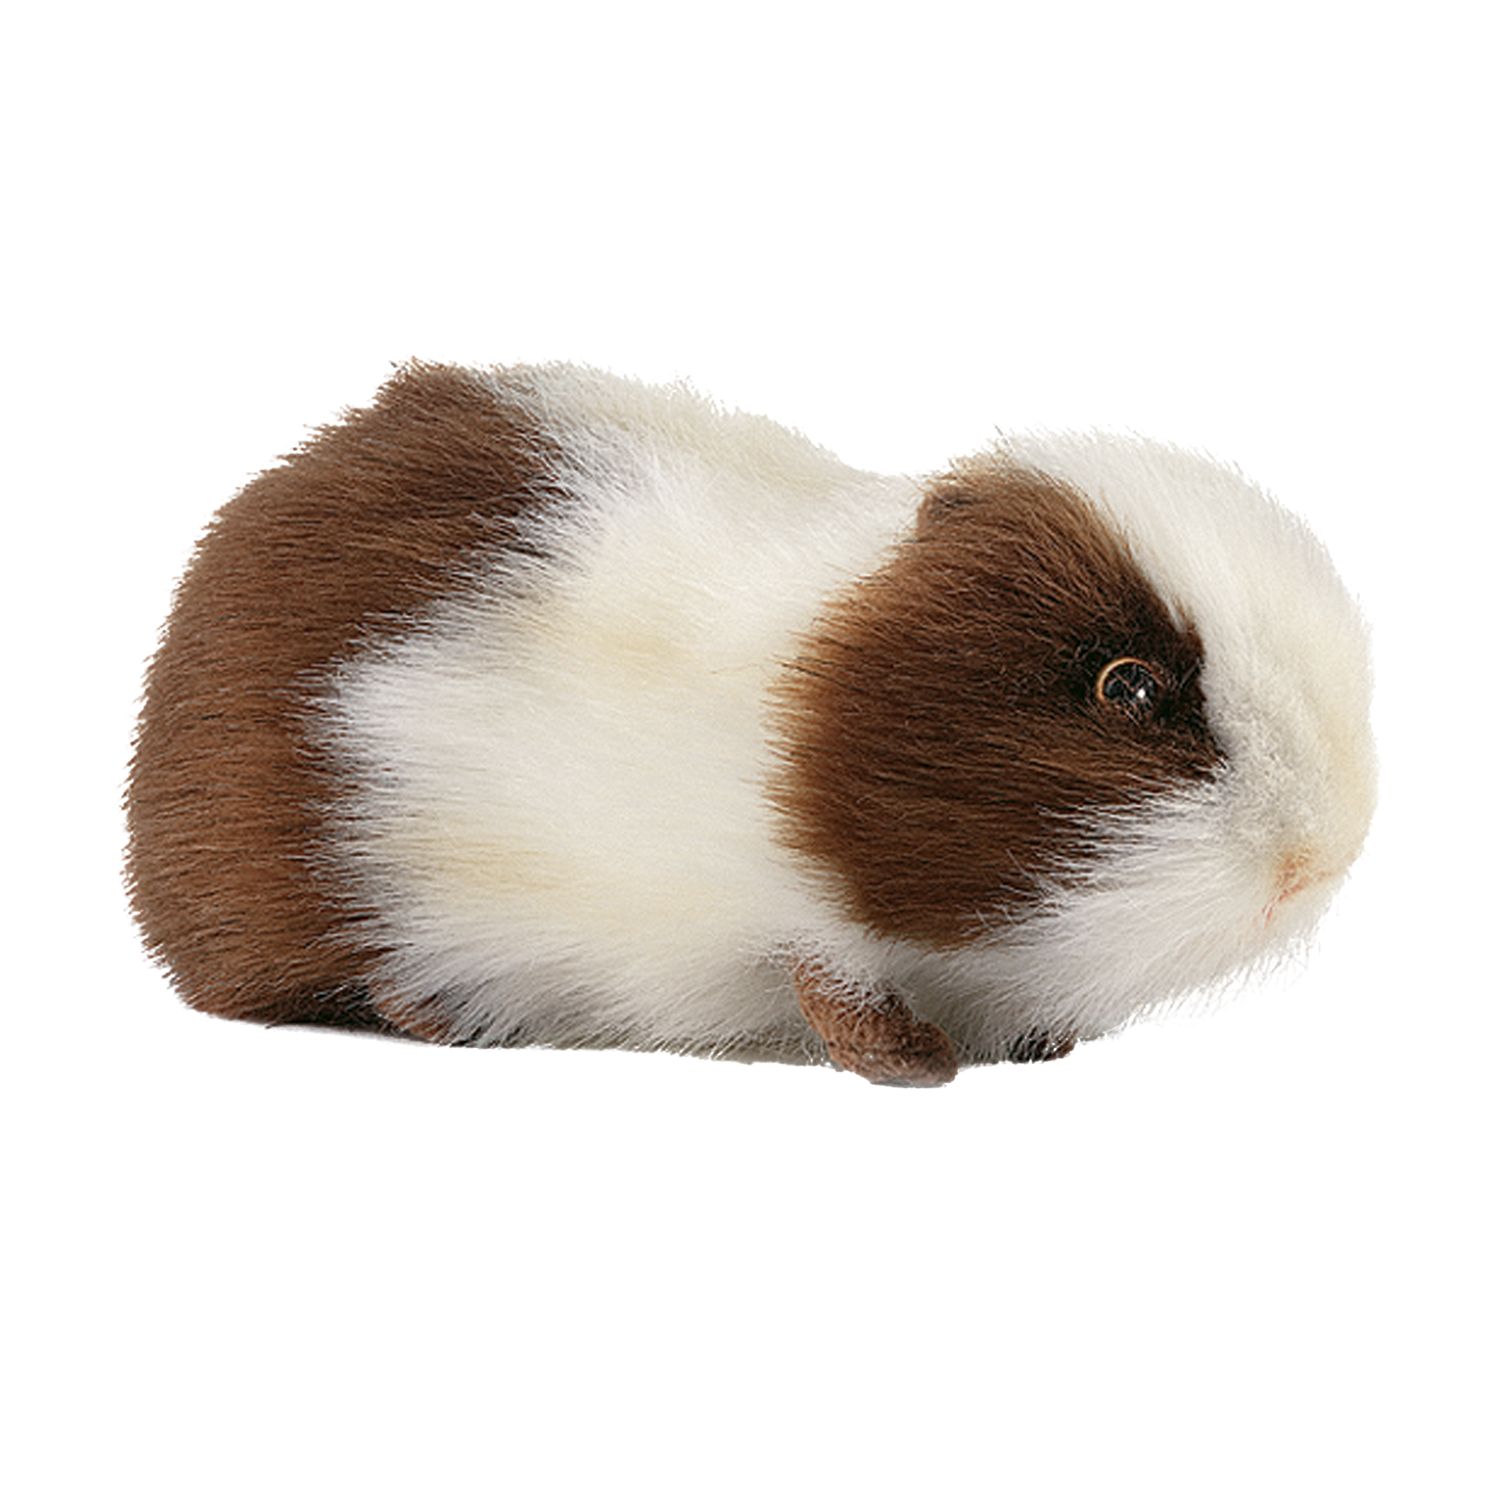 cuddly toy guinea pig